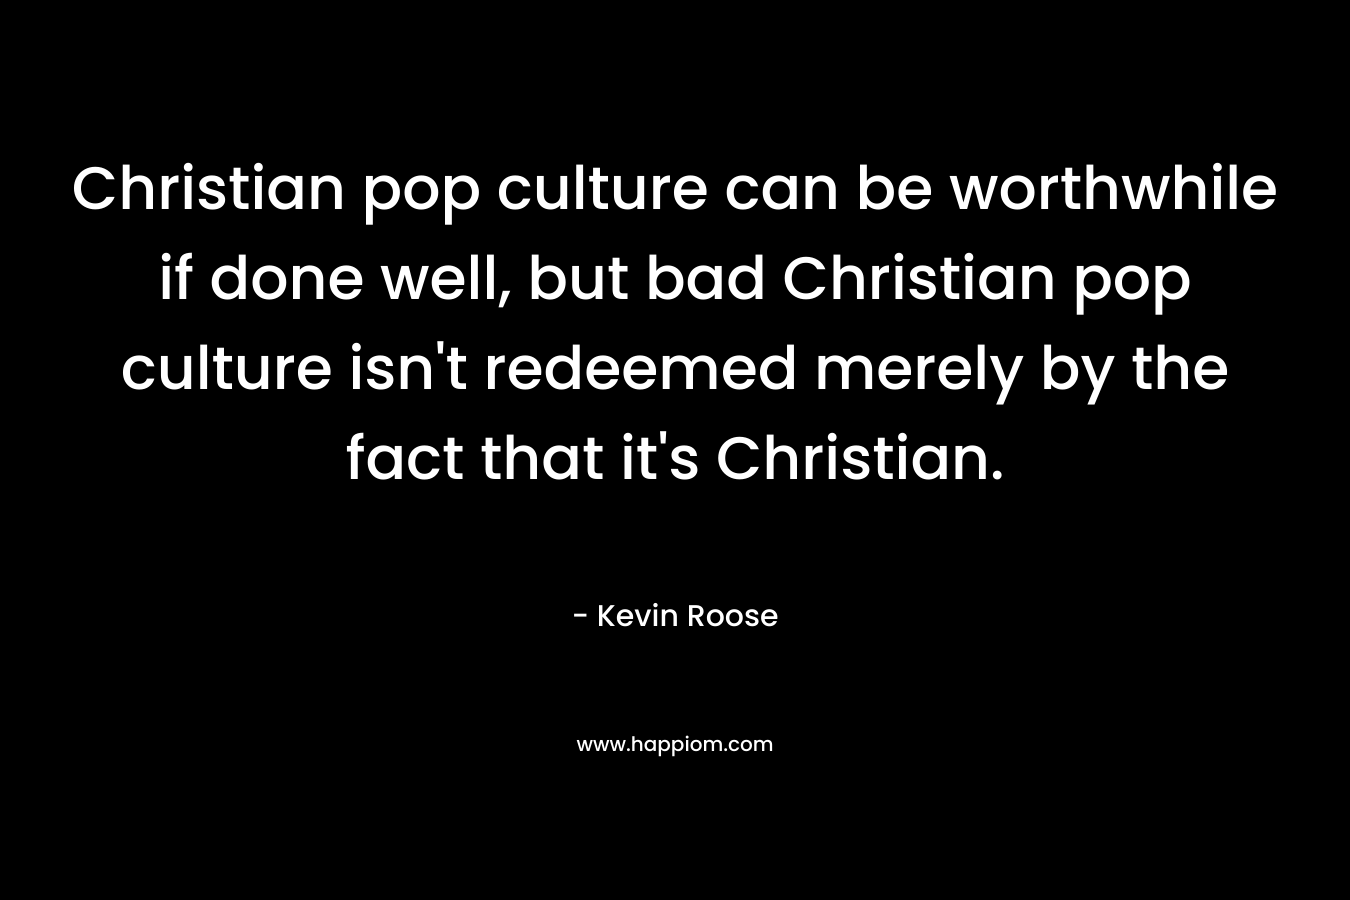 Christian pop culture can be worthwhile if done well, but bad Christian pop culture isn’t redeemed merely by the fact that it’s Christian. – Kevin Roose